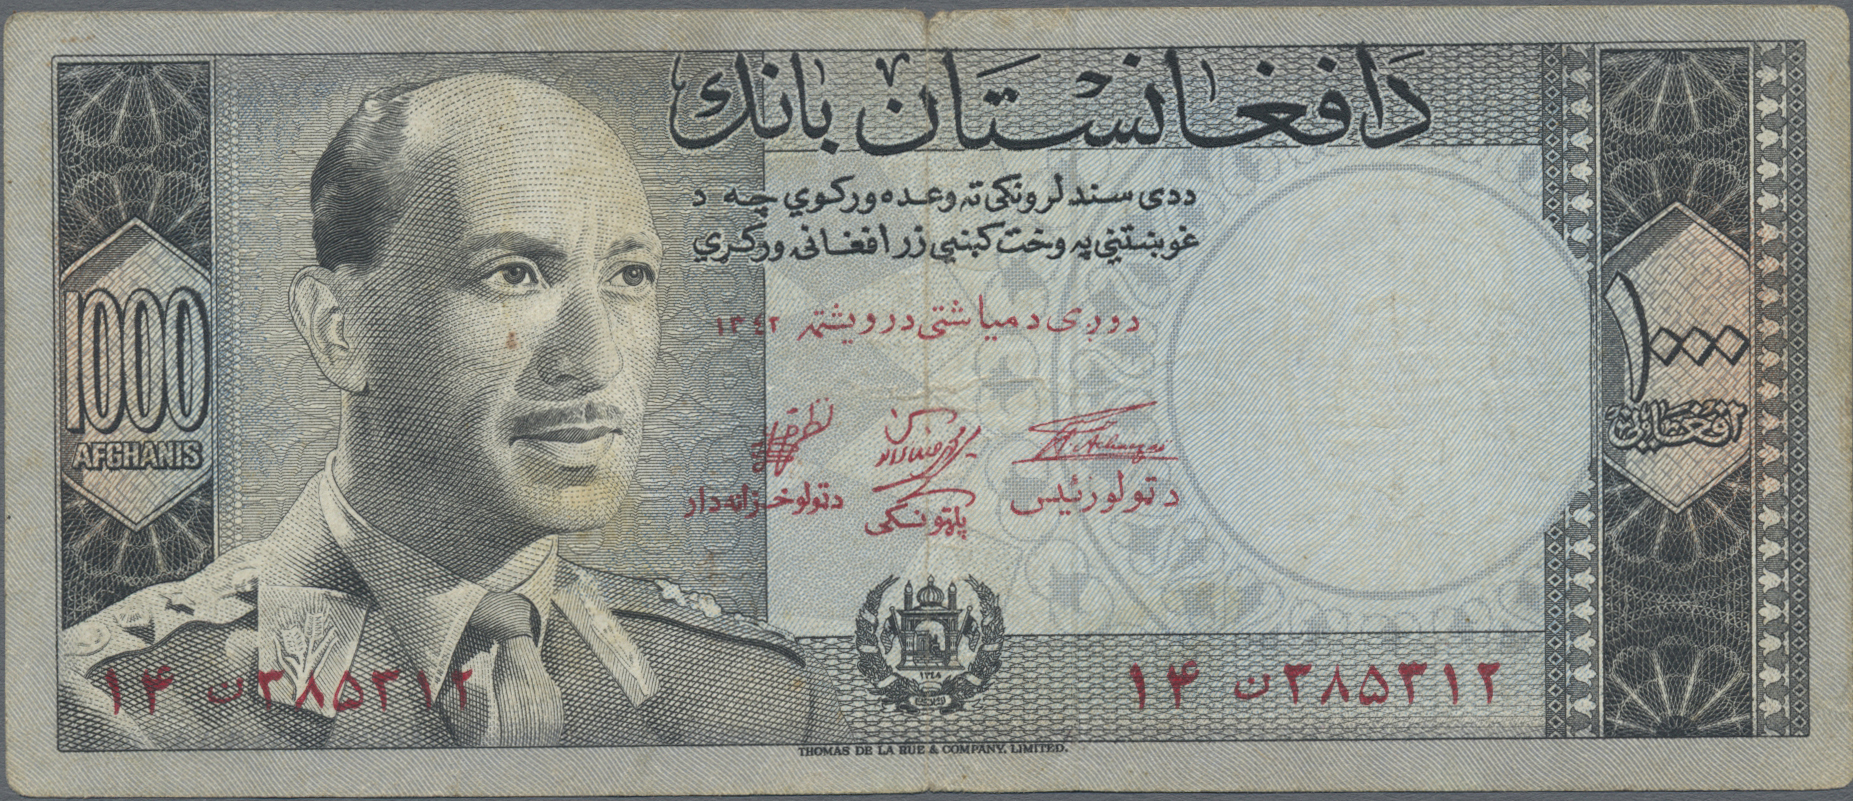 Lot 00004 - Afghanistan | Banknoten  -  Auktionshaus Christoph Gärtner GmbH & Co. KG 55th AUCTION - Day 1